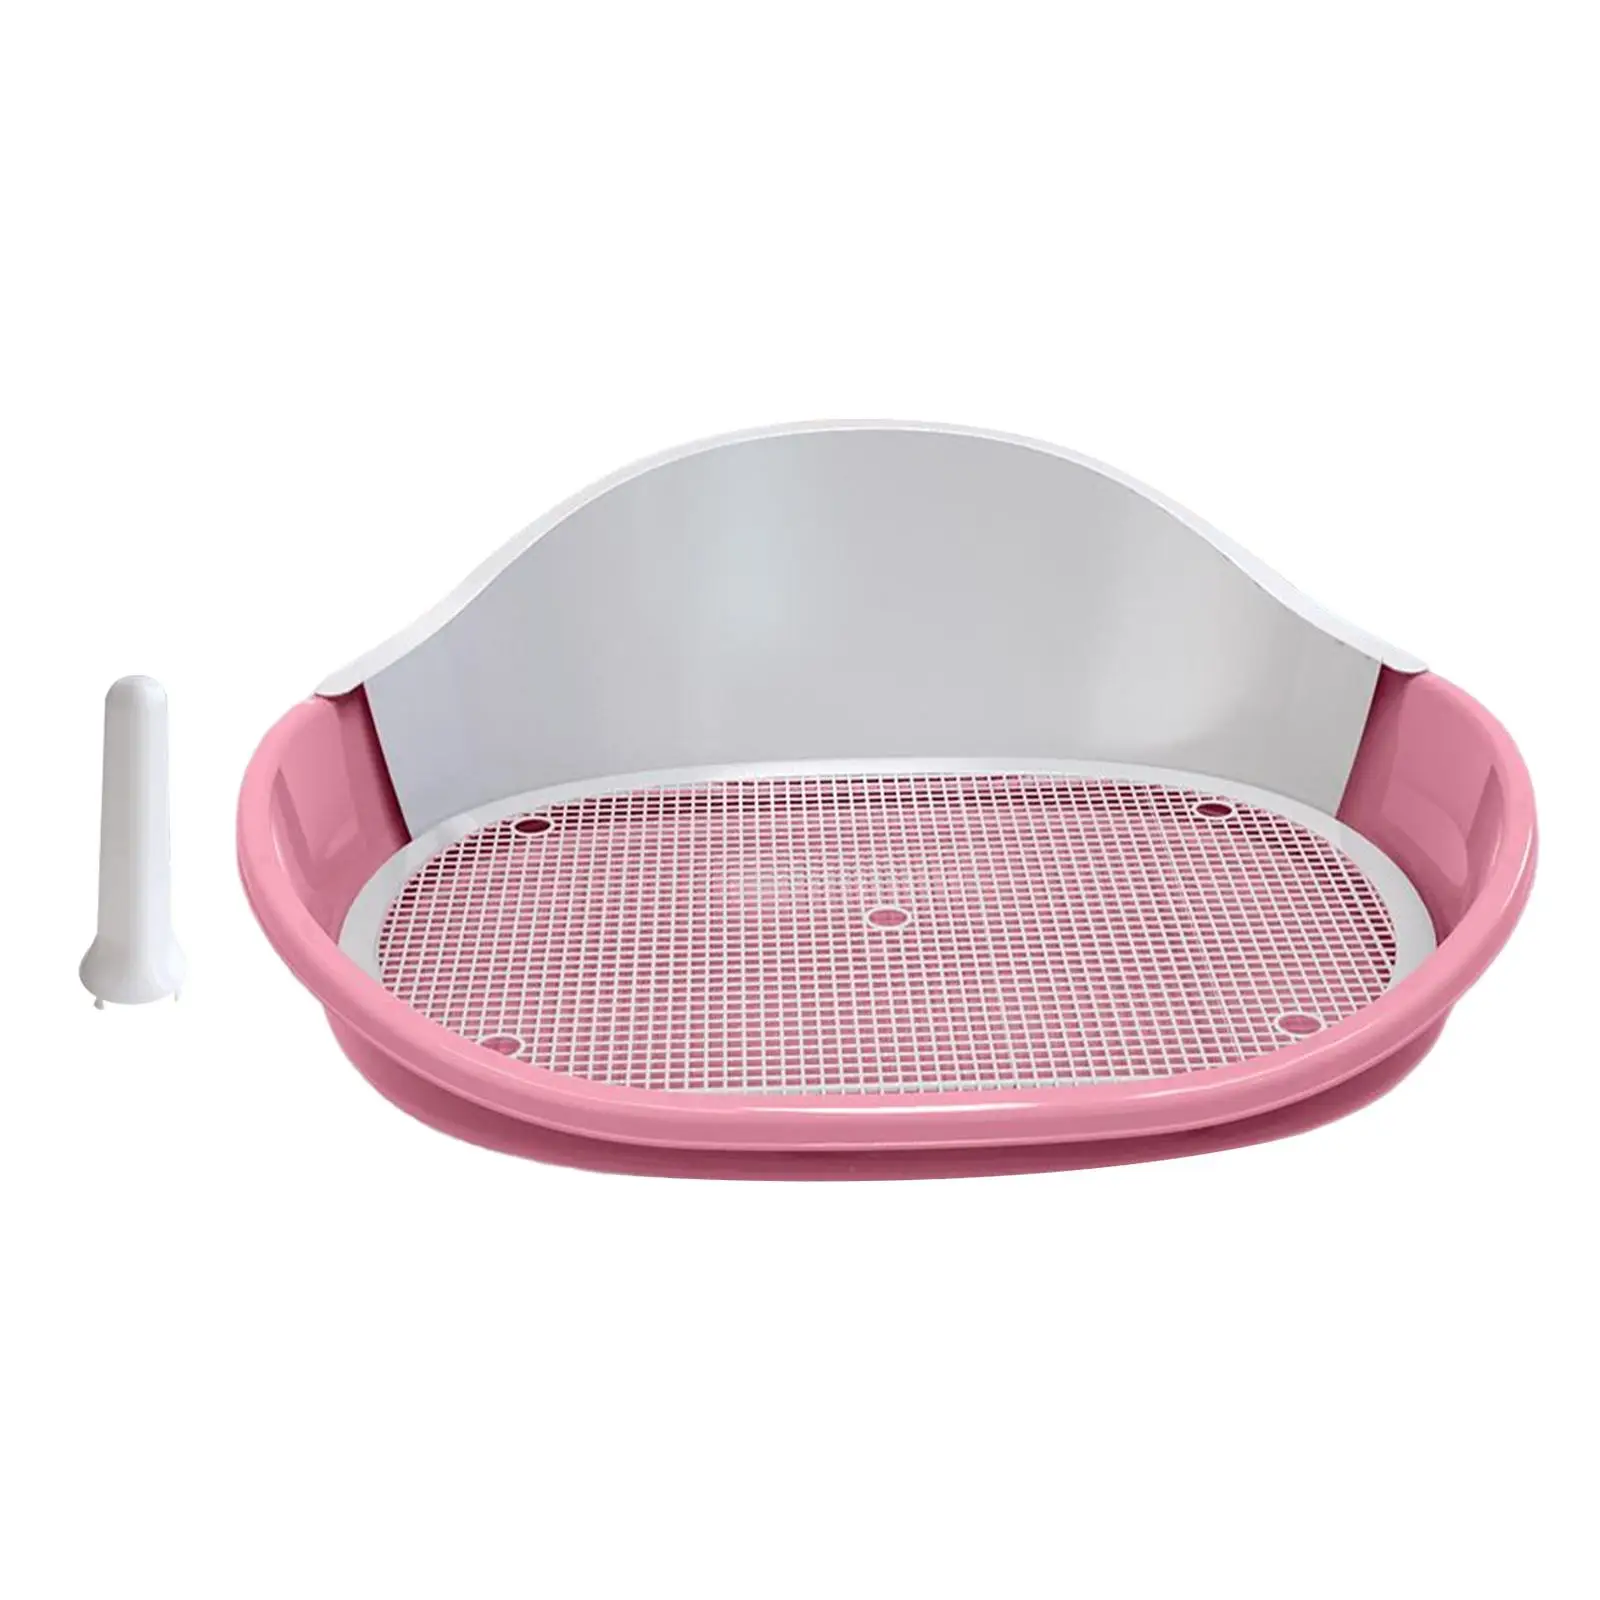 Dog Pee Pad with Bedpan Potty Trainer Urinary Keep Paws and Floors Clean